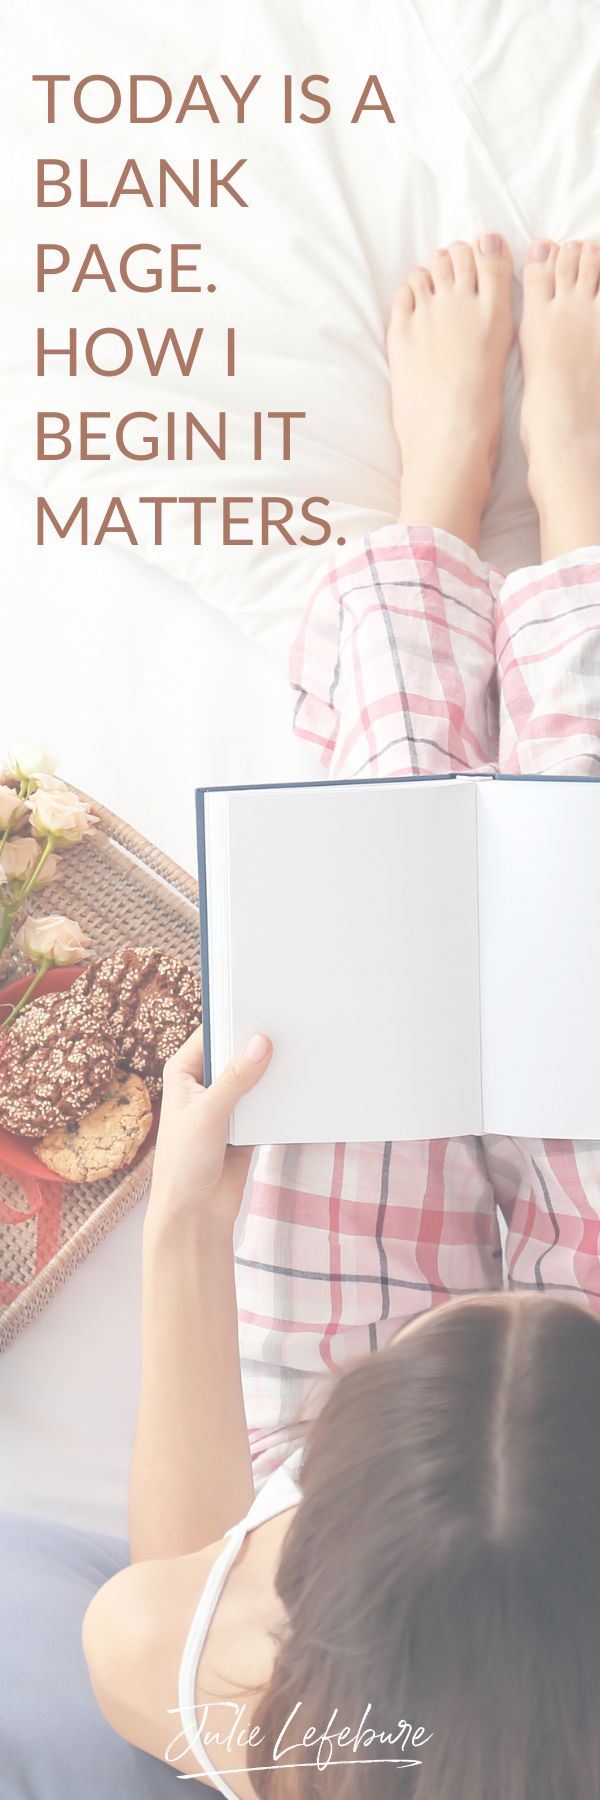 Today is a blank page. How I begin it matters. | woman sitting in bed with a blank book on lap and breakfast tray beside her